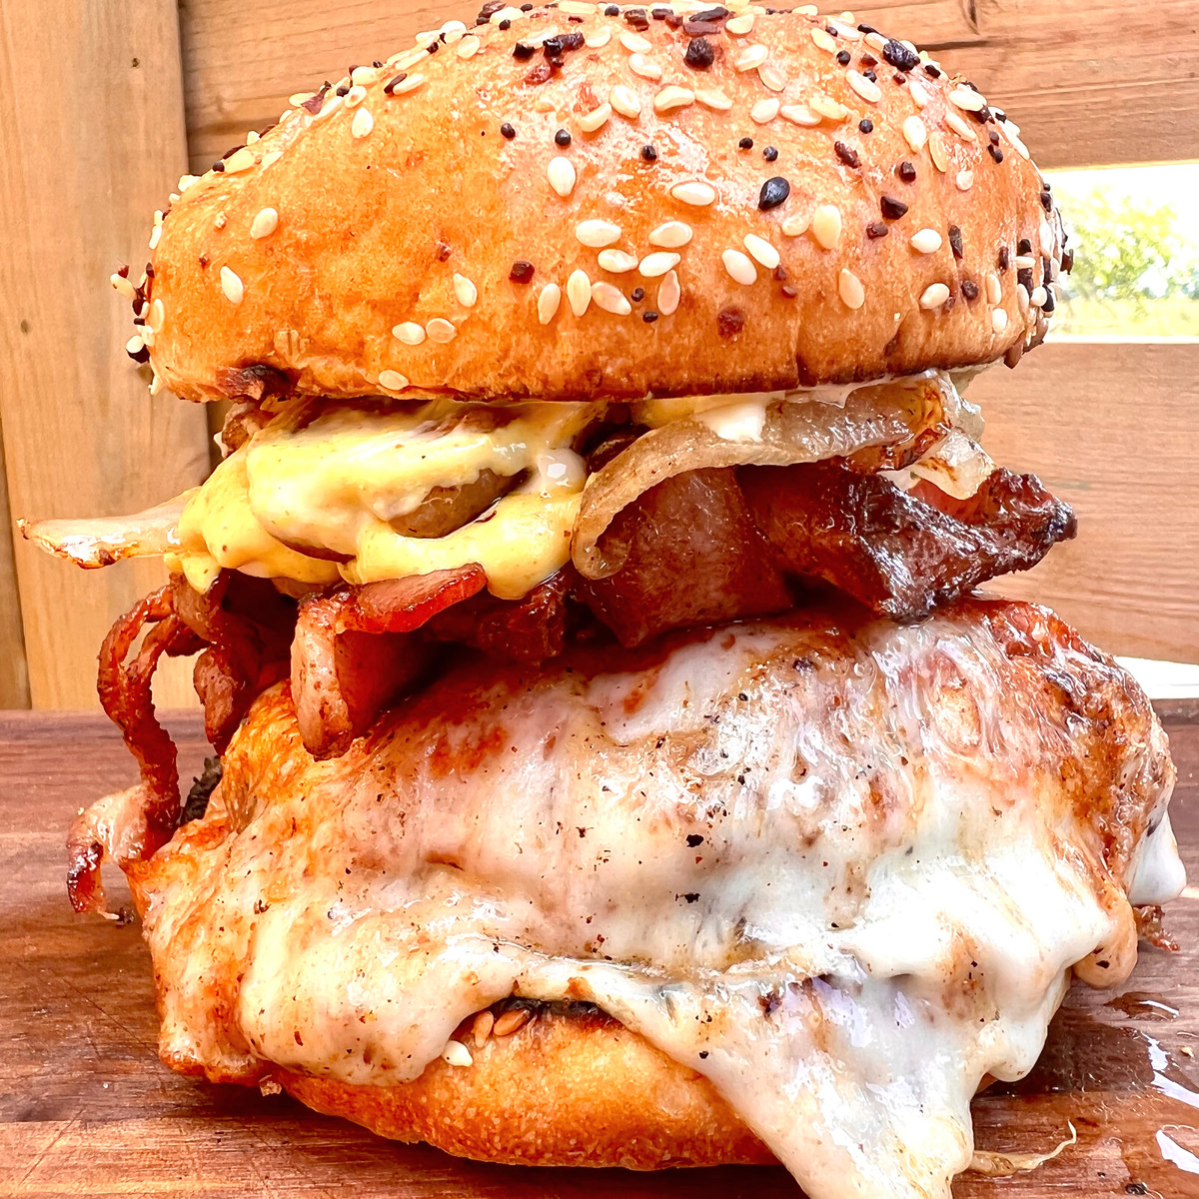 Alchemy Grills fire-grilled bacon banquet burger